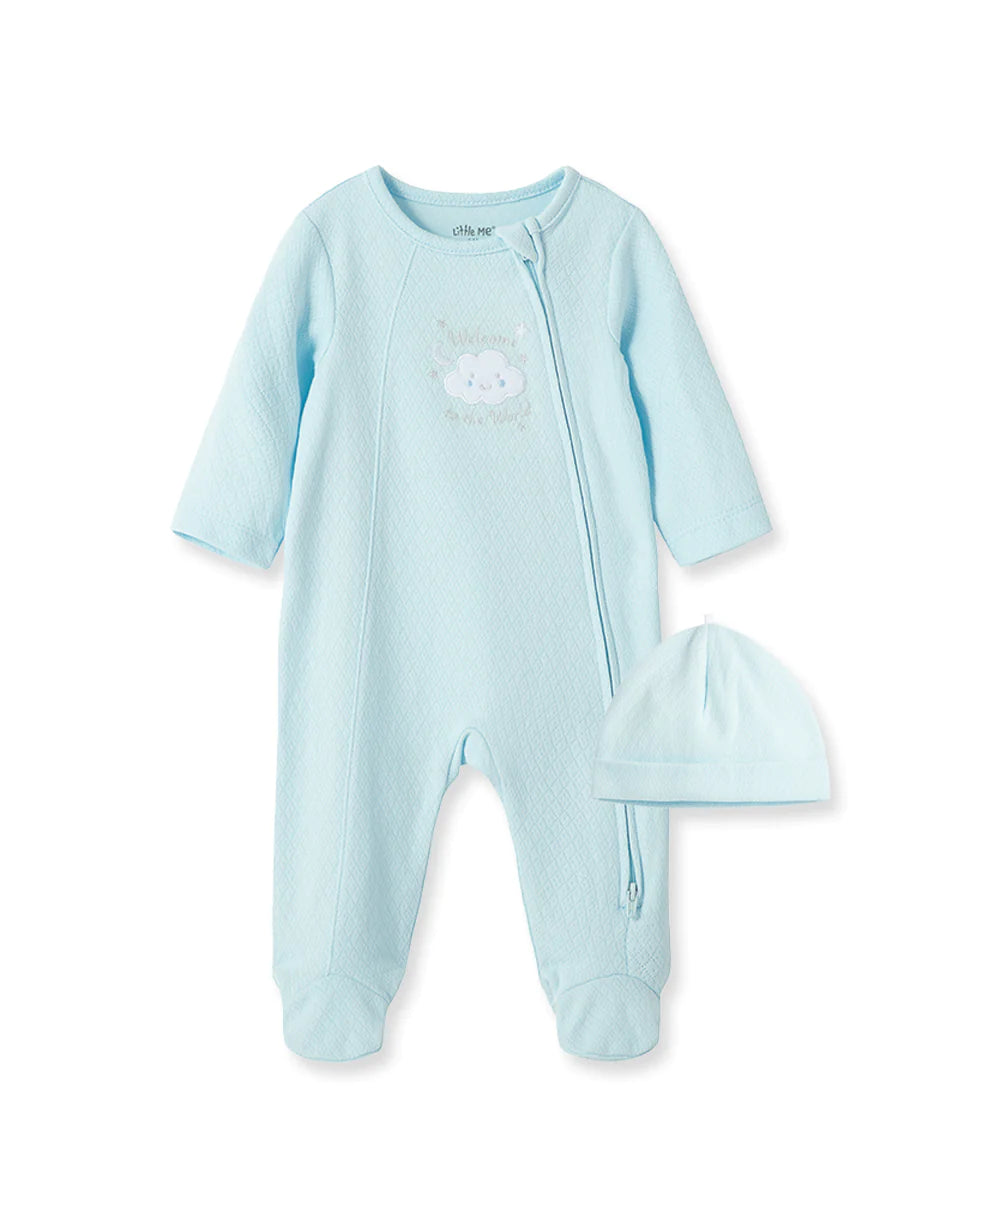 NEW BLUE WELCOME TO THE WORLD ZIP FOOTED ONE-PIECE AND HAT